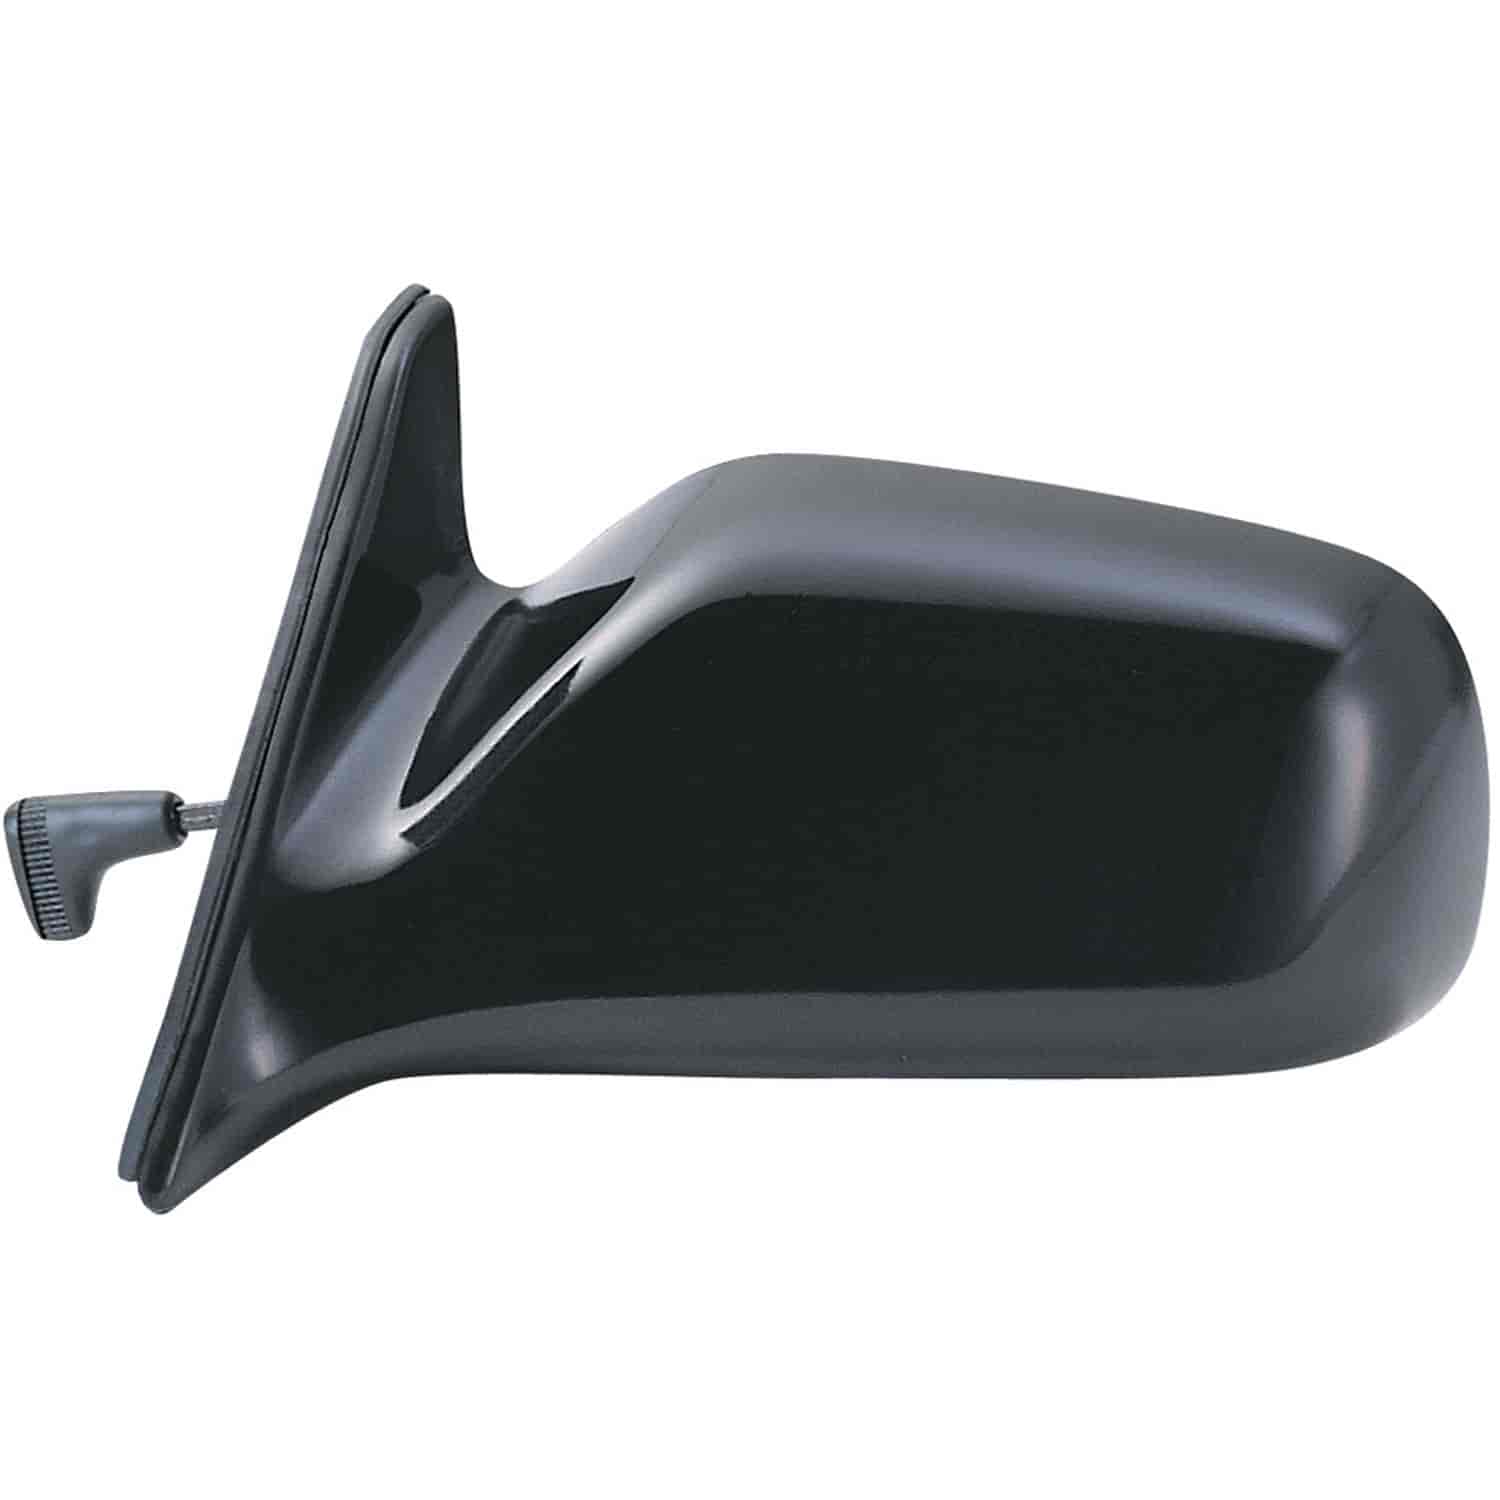 OEM Style Replacement mirror for 88-93 Toyota Corolla Sedan 88-92 Wagon US/Canada built driver side